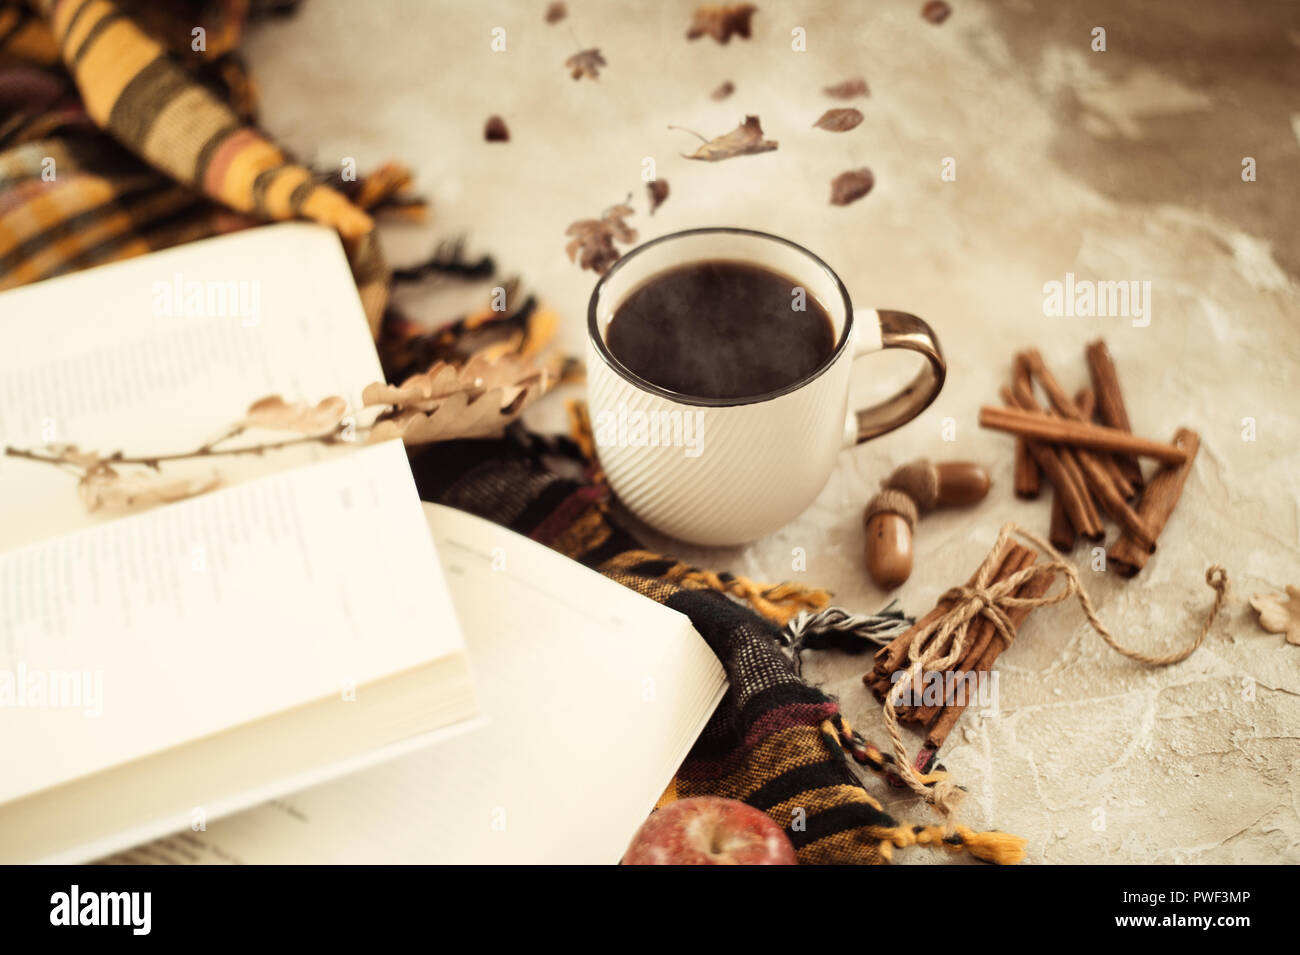 Autumn composition. Cup of coffee, blanket, autumn leaves, cinnamon sticks on beige background. Flat lay, top view. Stock Photo